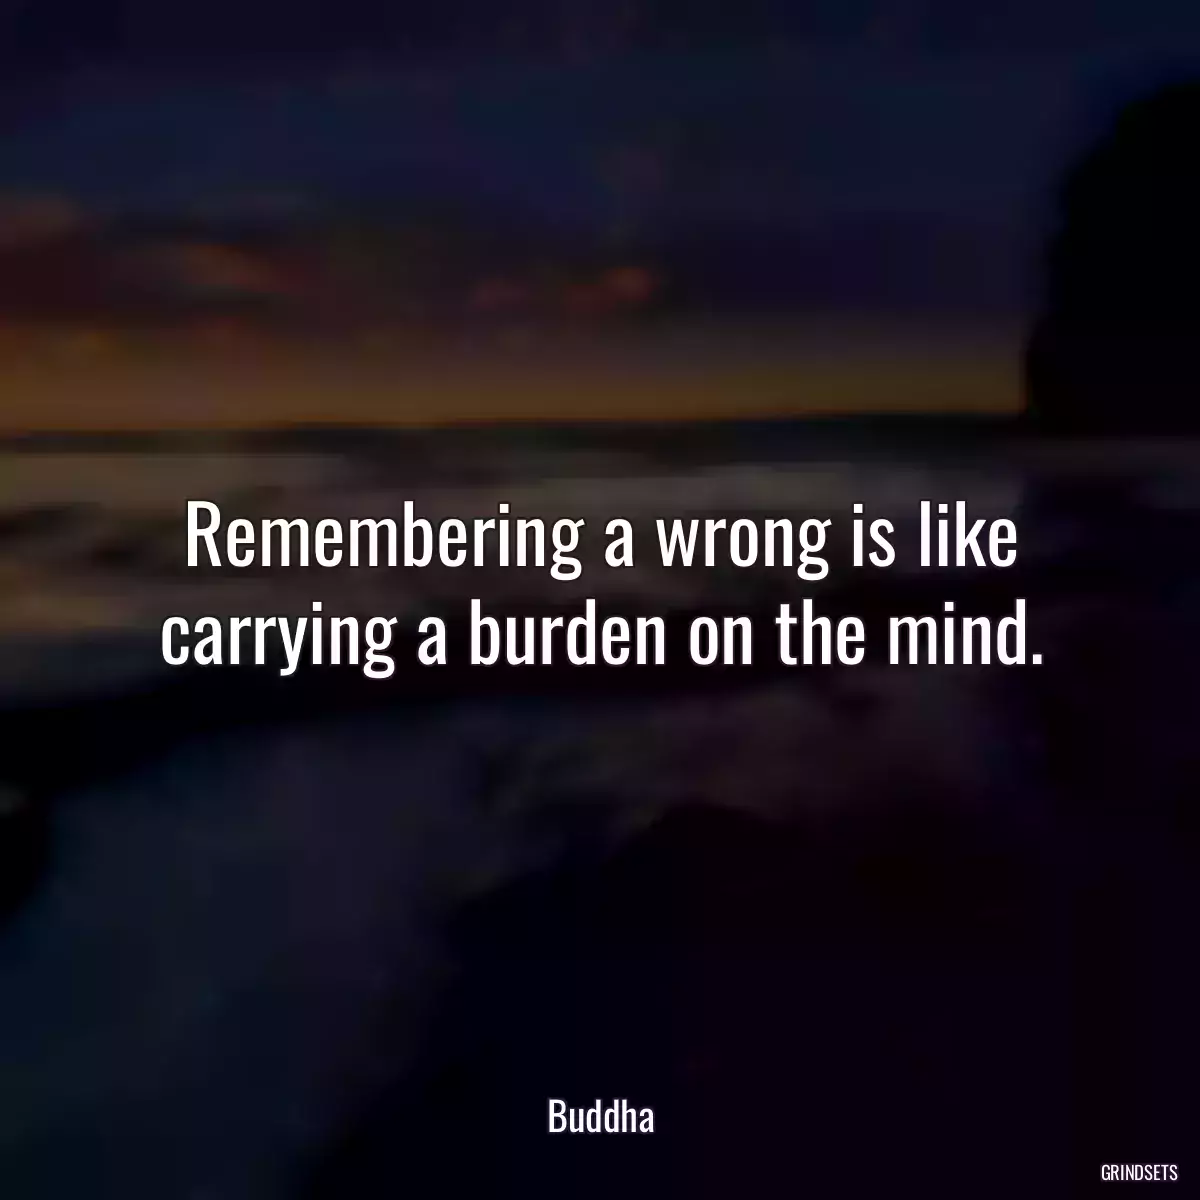 Remembering a wrong is like carrying a burden on the mind.